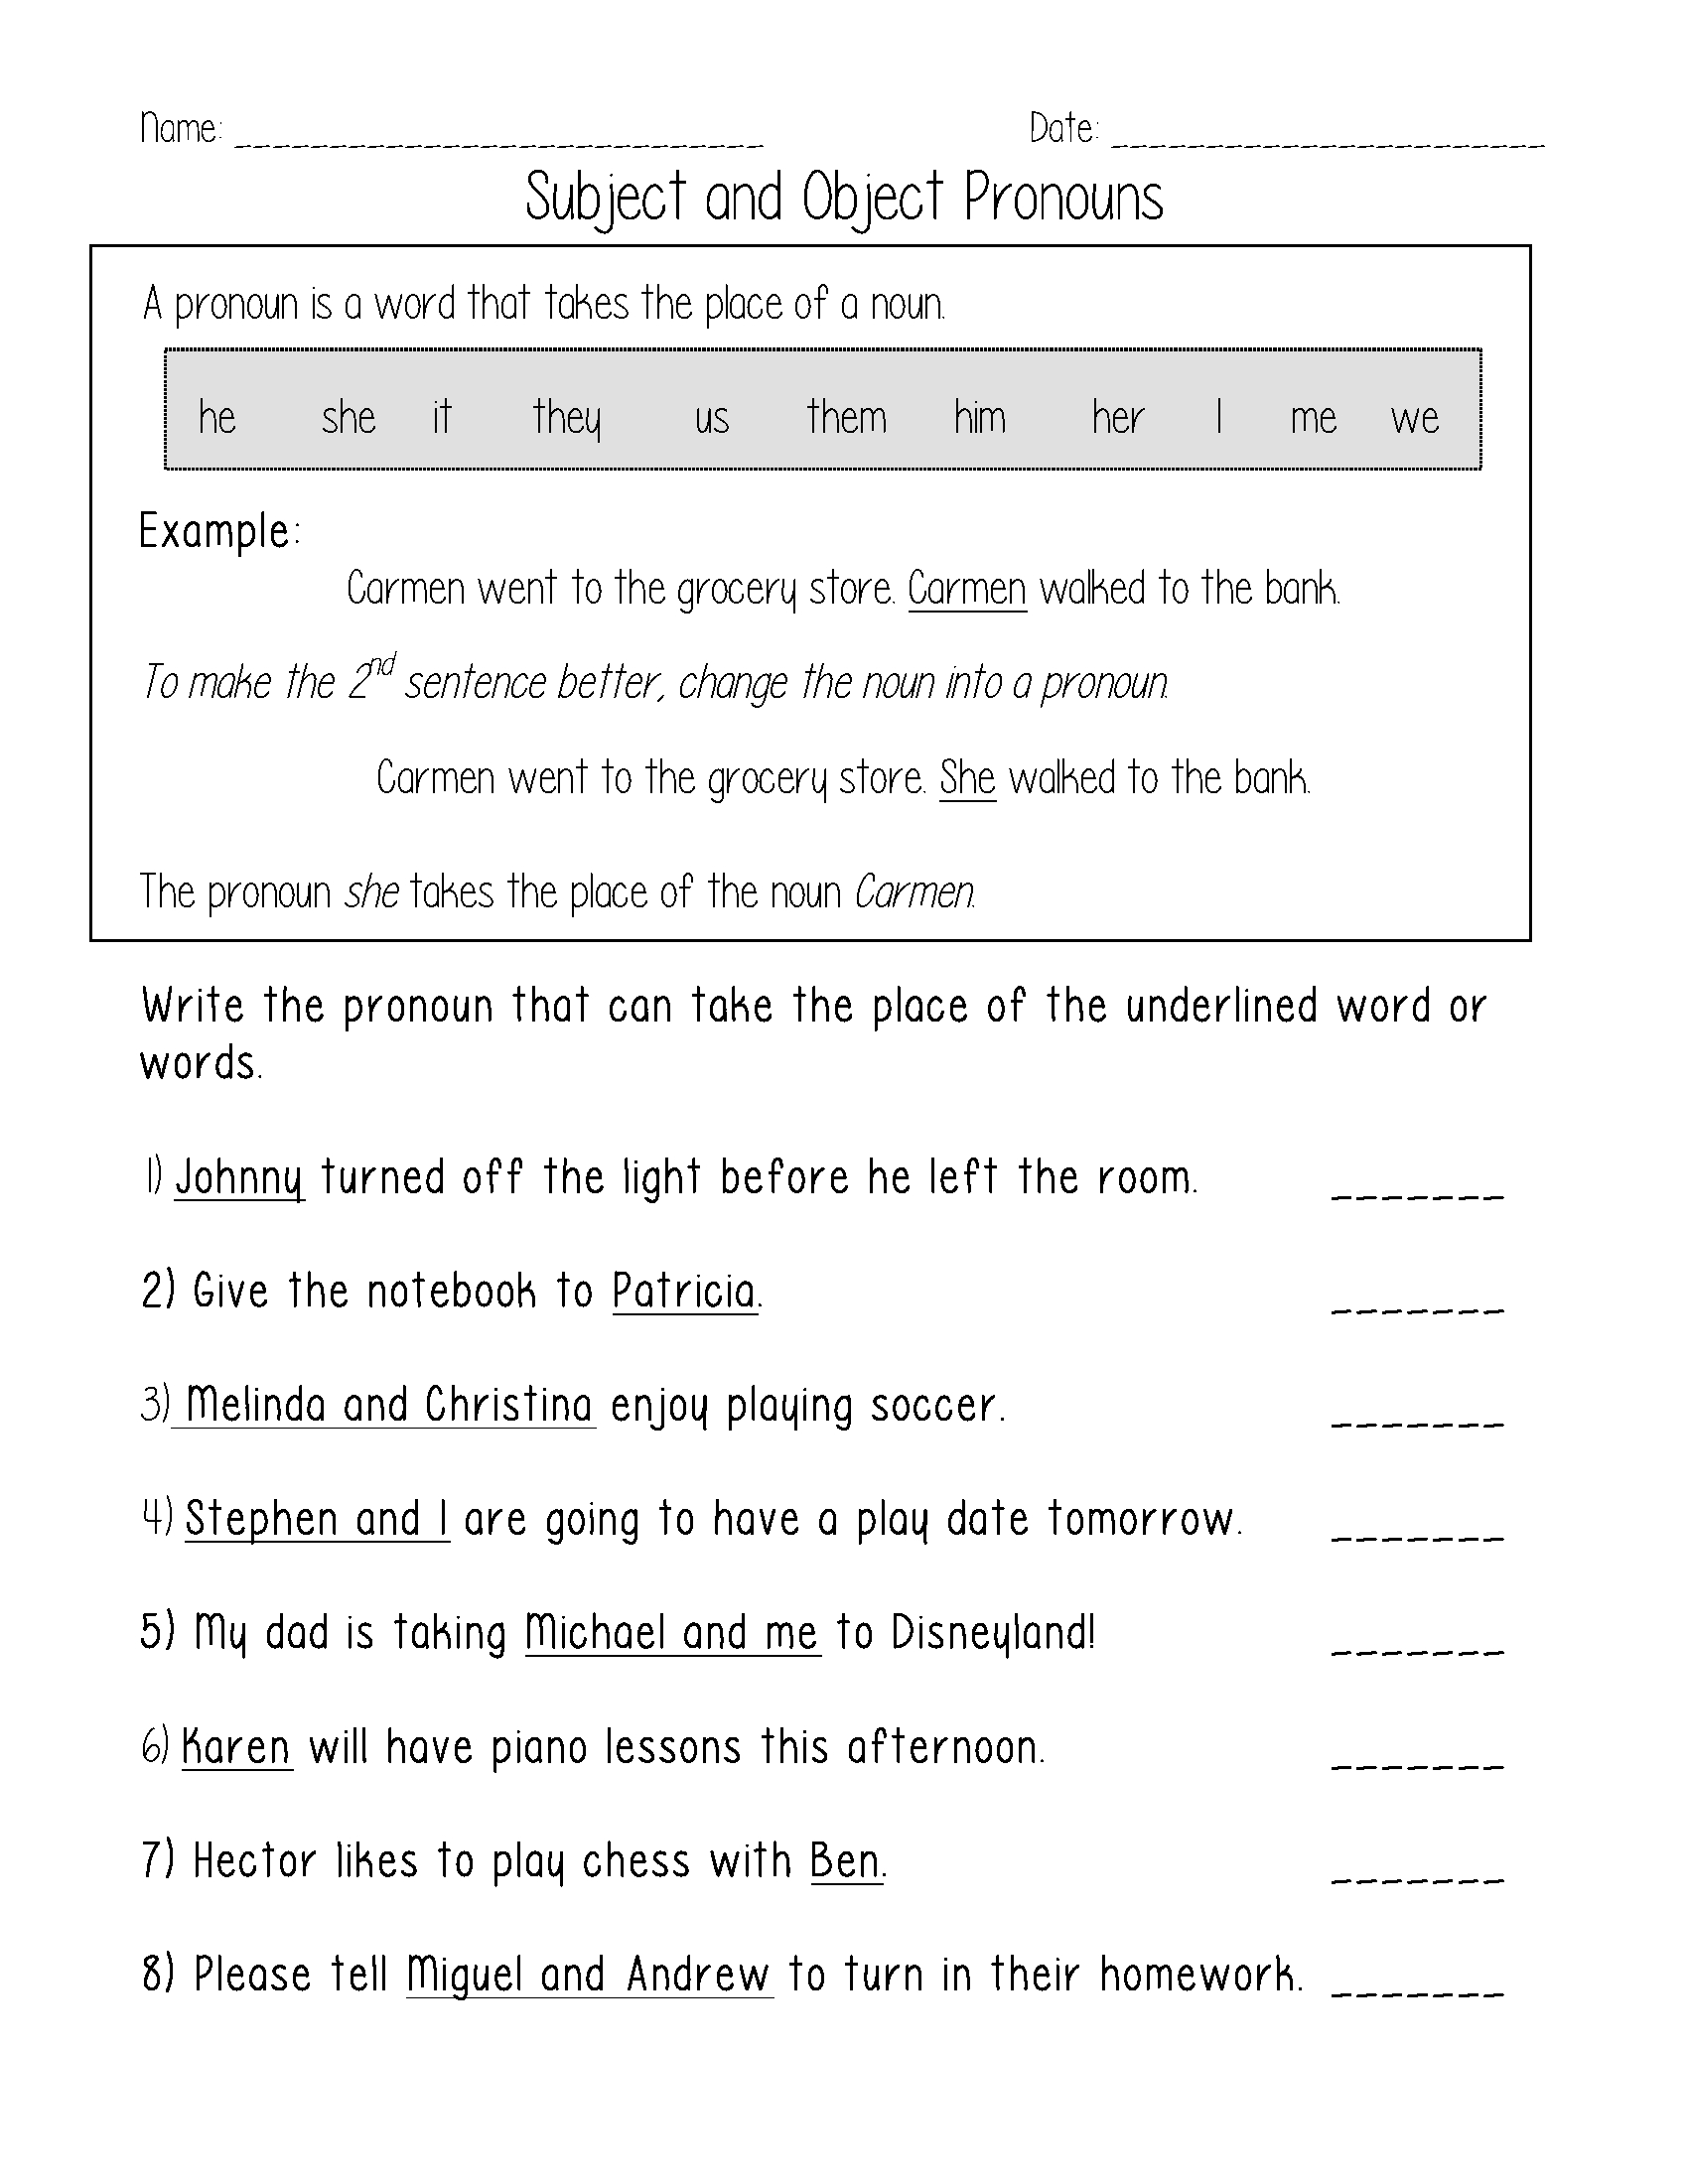 subject-and-object-pronouns-worksheets-object-pronouns-worksheet